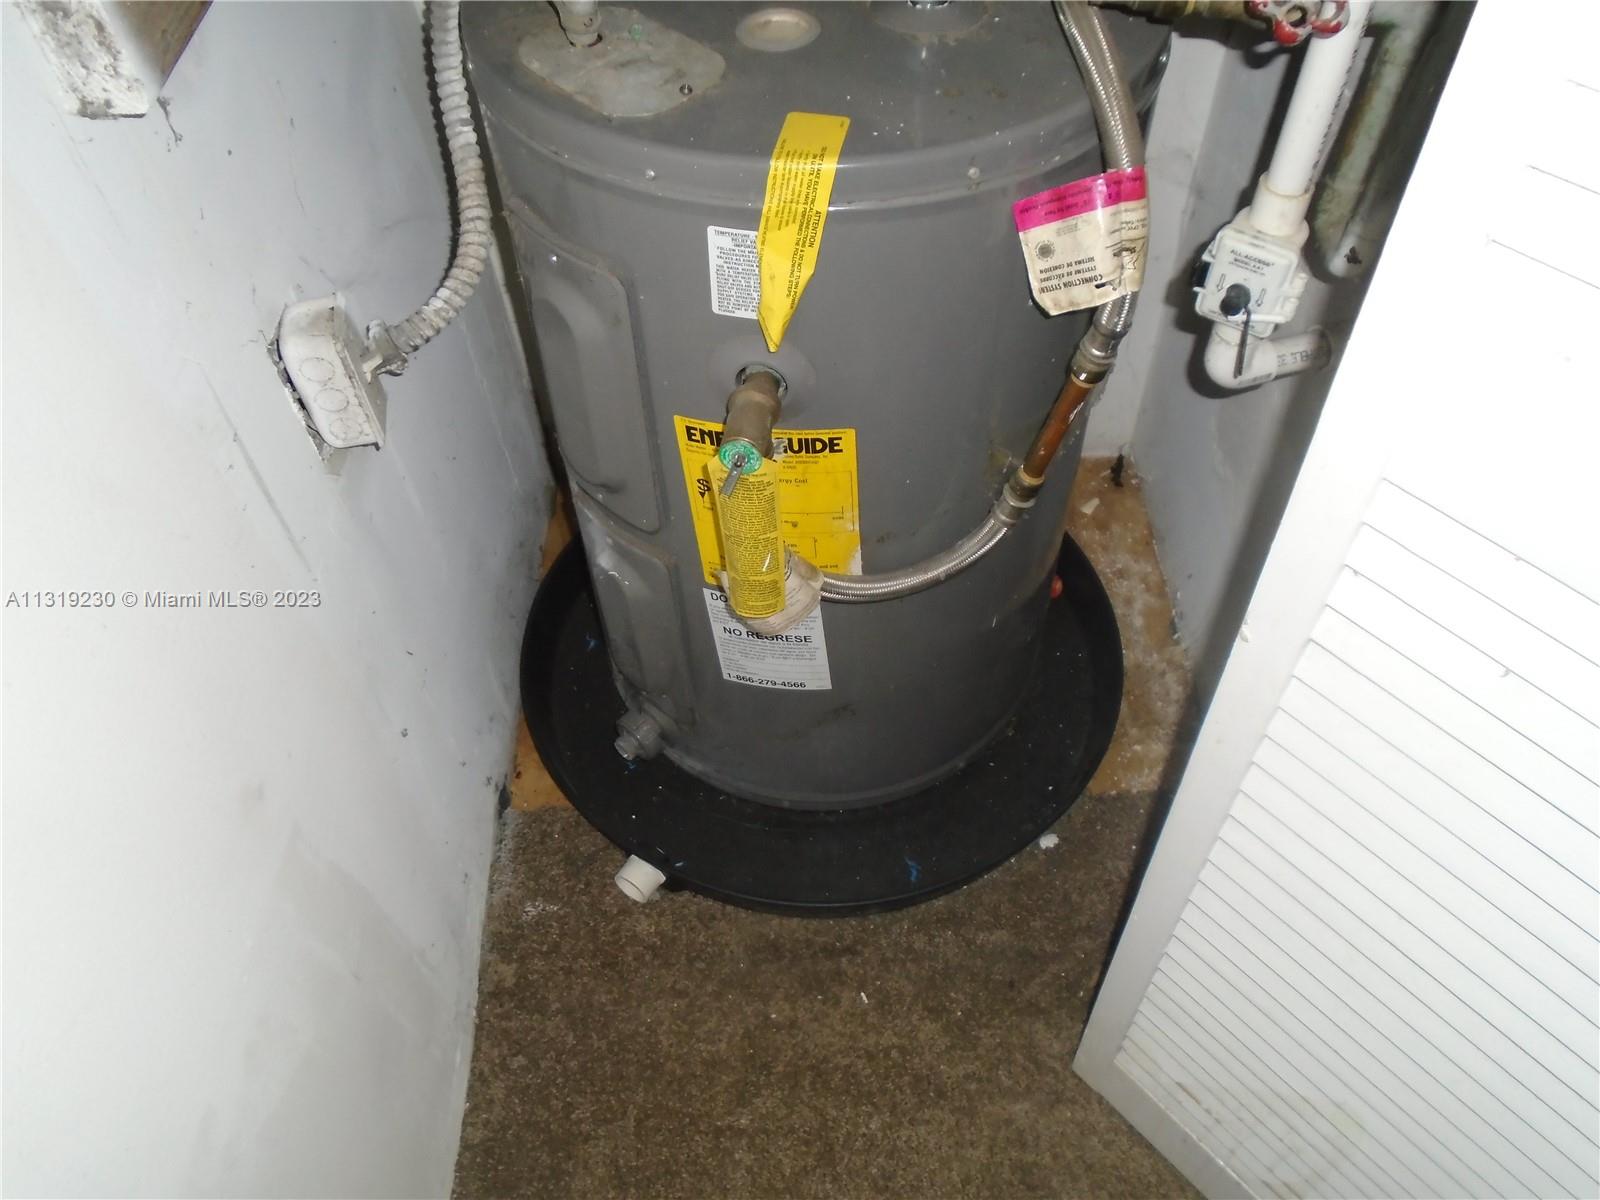 Water heater 2 years old